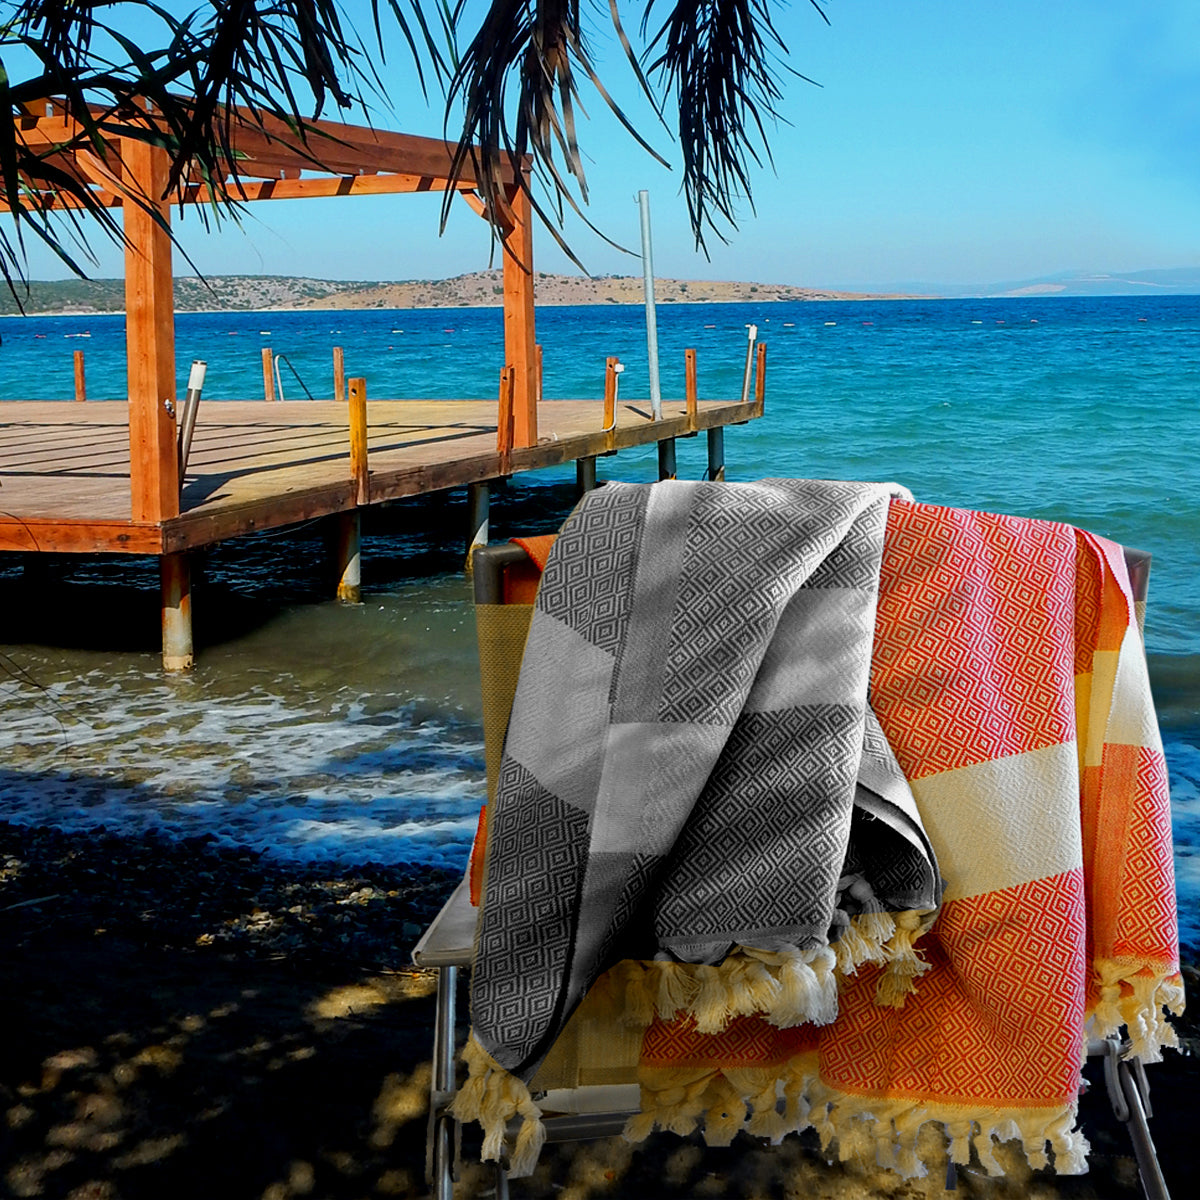 Authentic Turkish beach, Towels for Quiquattro and from more QuiQuattro bath –